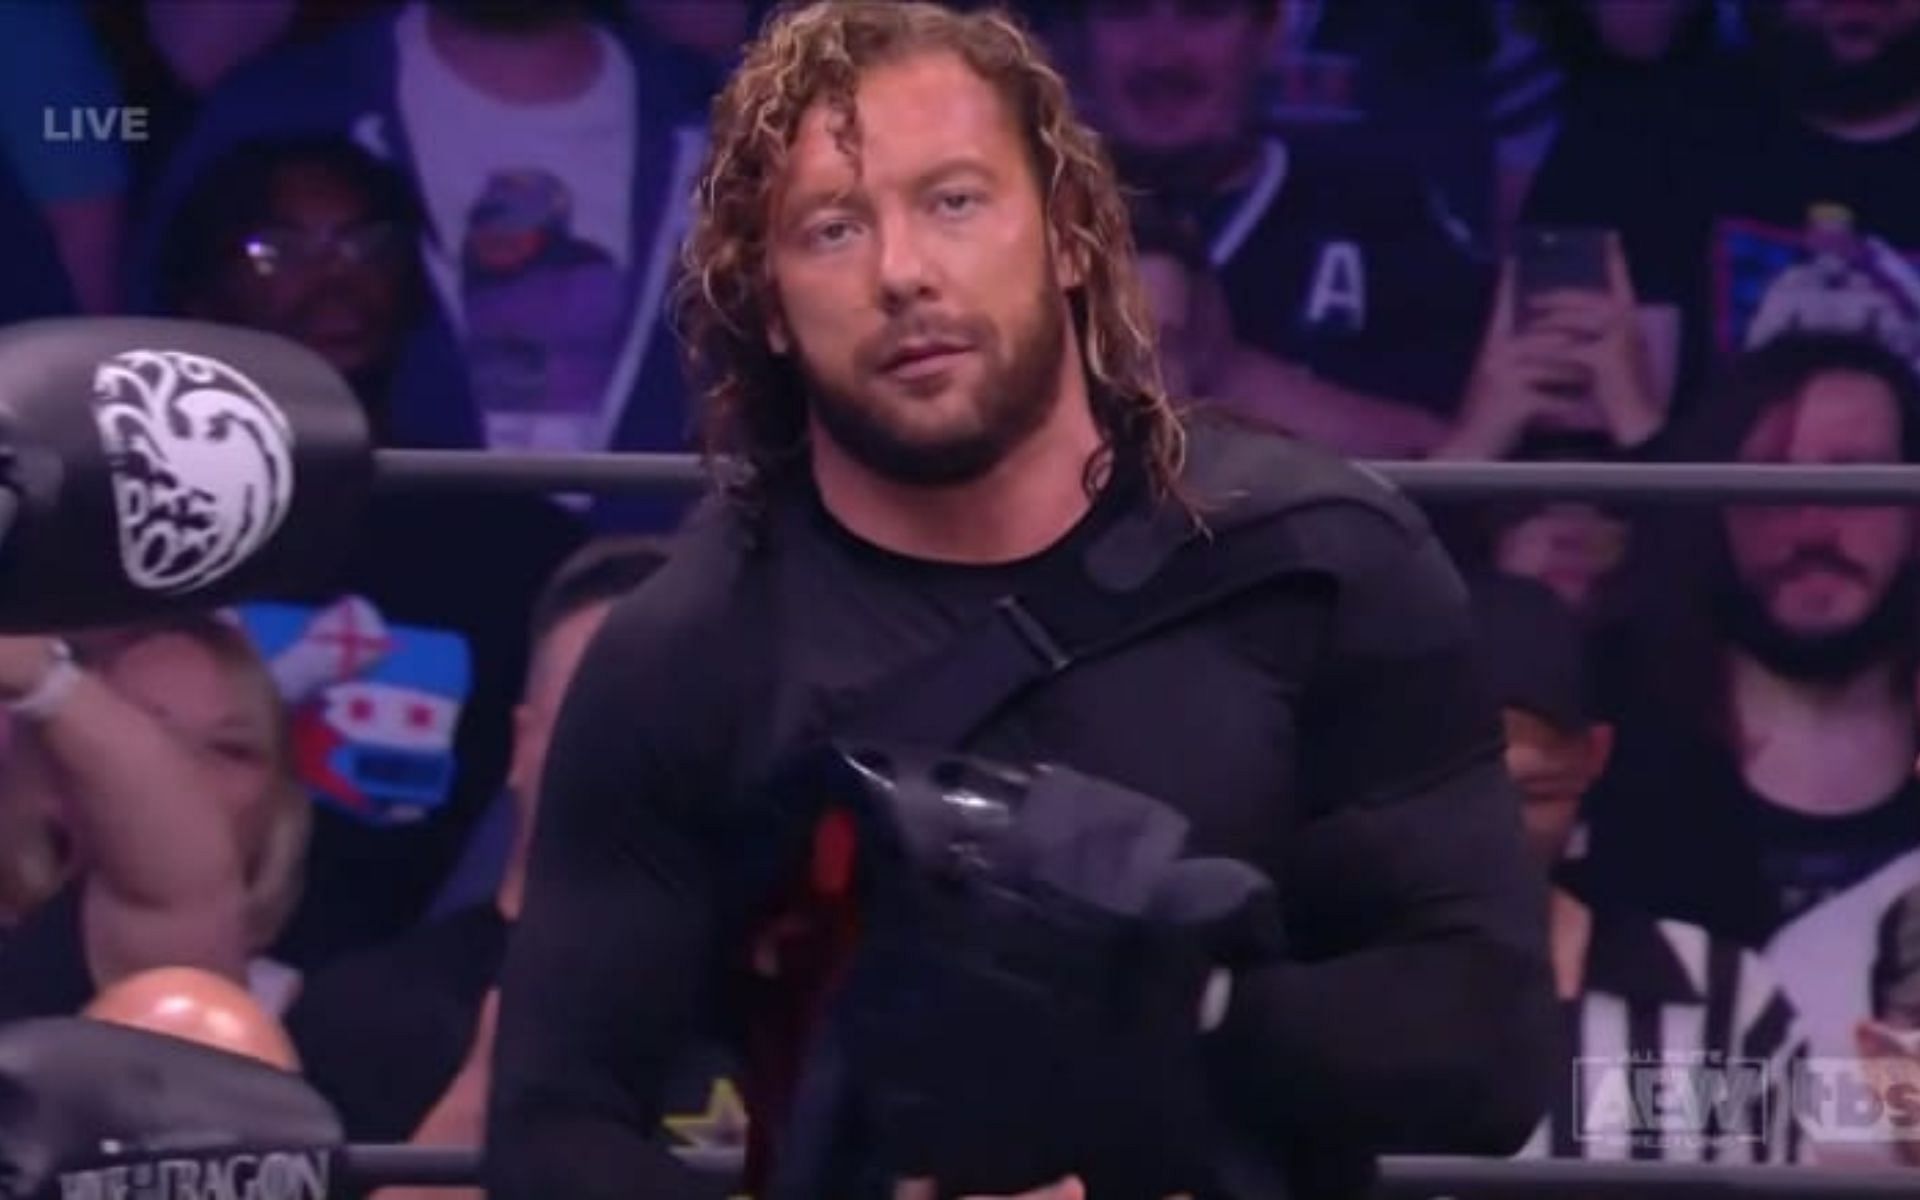 Kenny Omega made his return earlier on AEW Dynamite against the former WWE star&#039;s team.